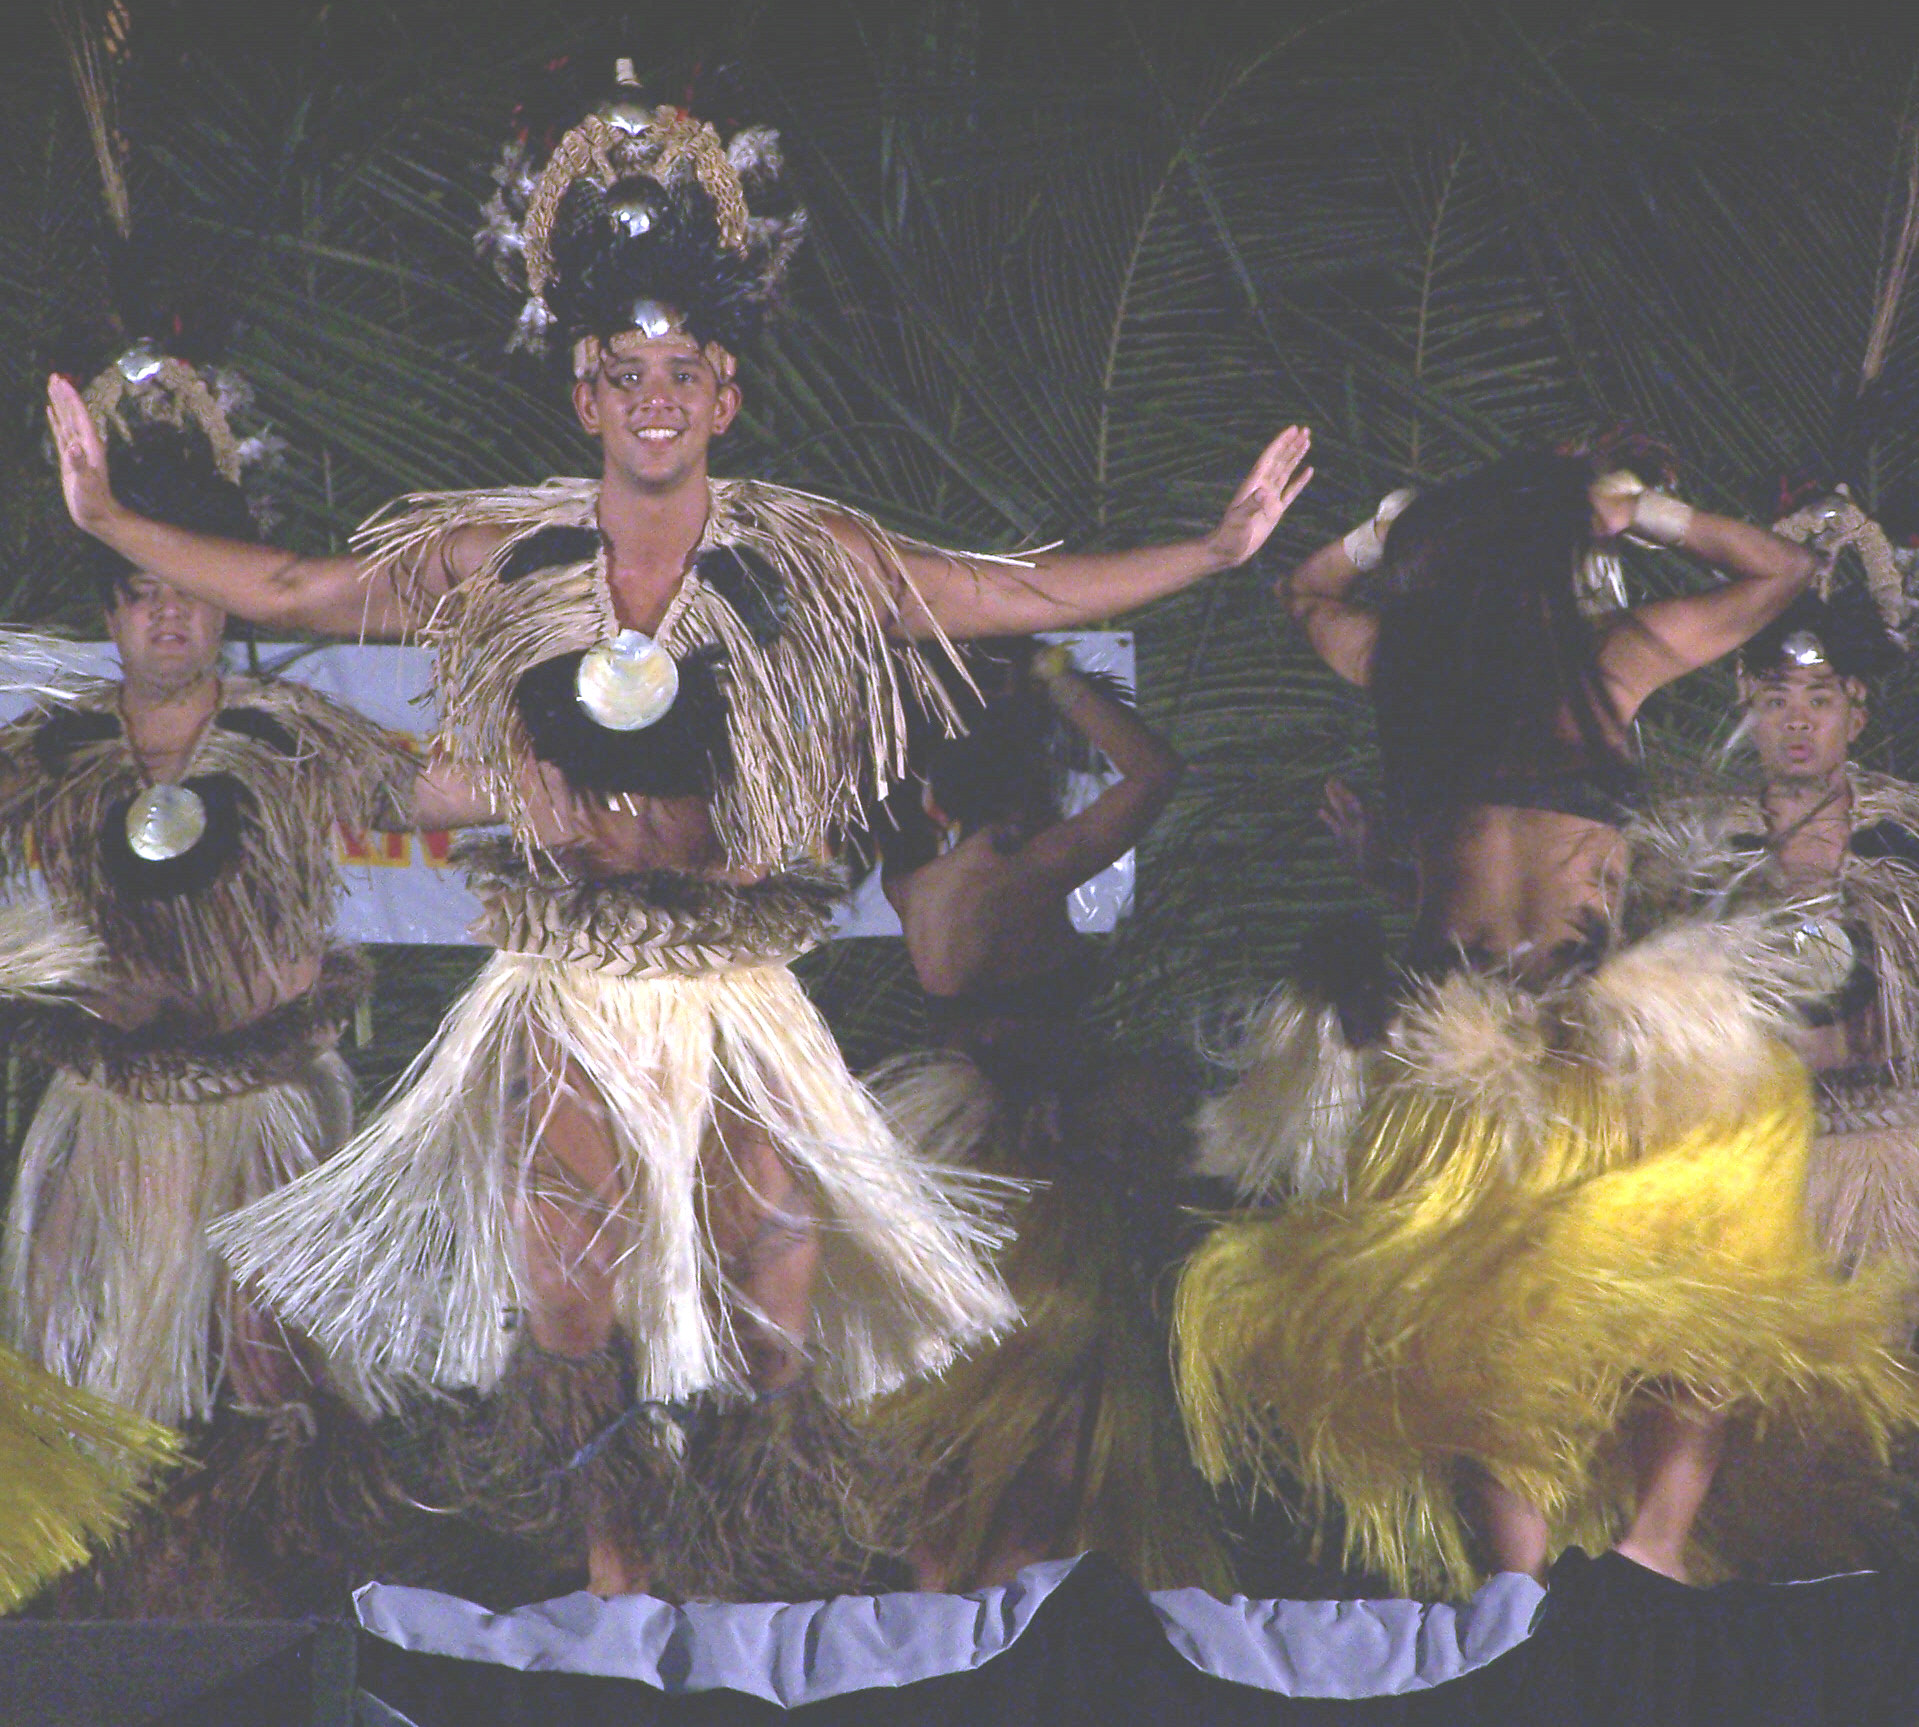 woman wearing an ornate hula skirt in front of some other people